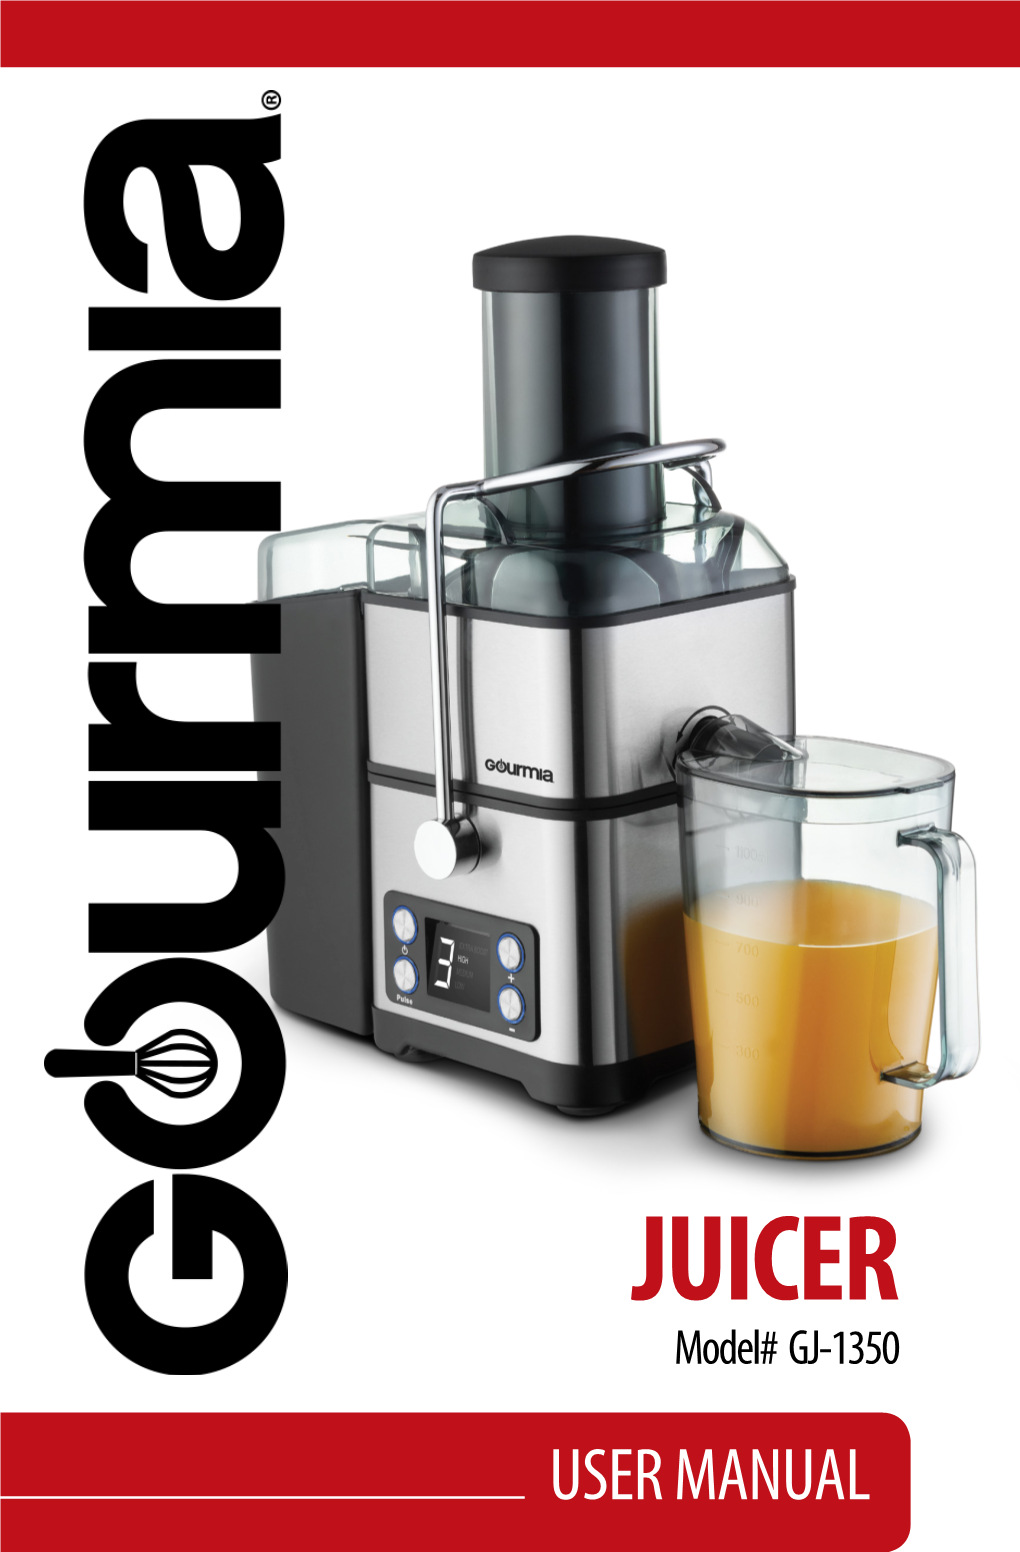 JUICER Model# GJ-1350 USER MANUAL Read This Manual Thoroughly Before Using and Save It for Future Reference